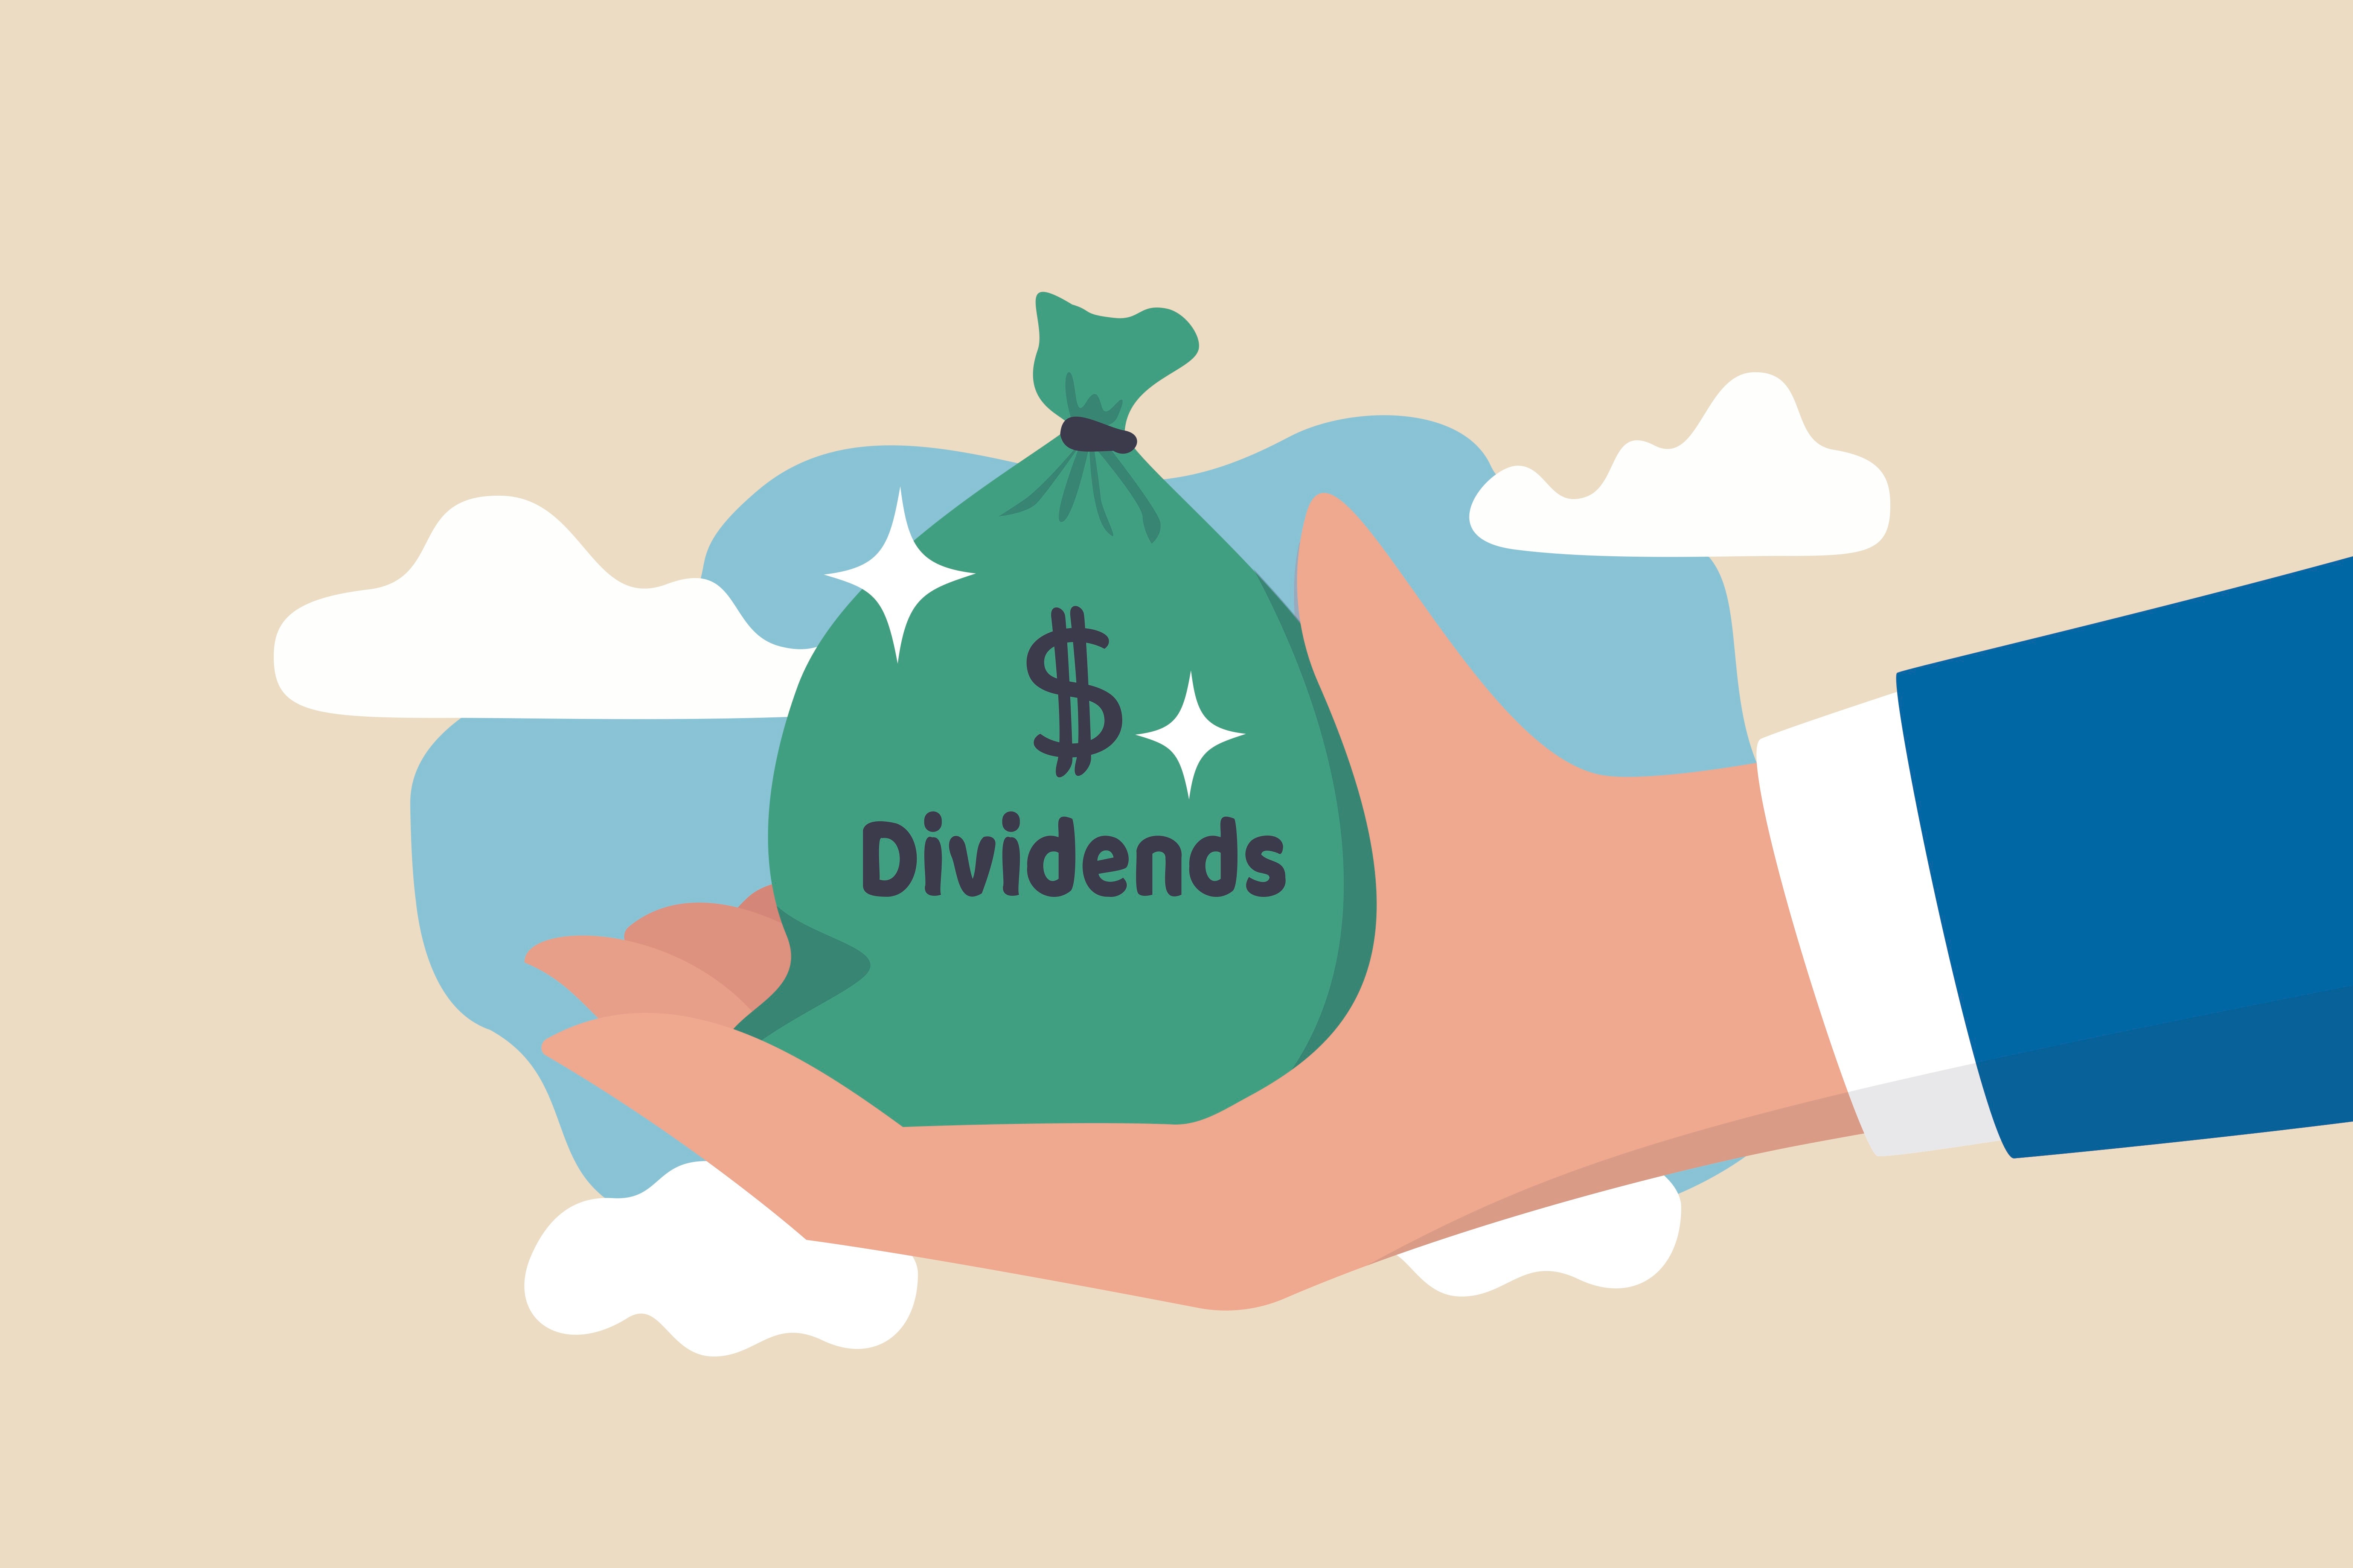 Want To Invest Like Kenneth Griffin? Here Is 1 Dividend Stock Citadel Has That Could Be A Nice Addition To A Portfolio